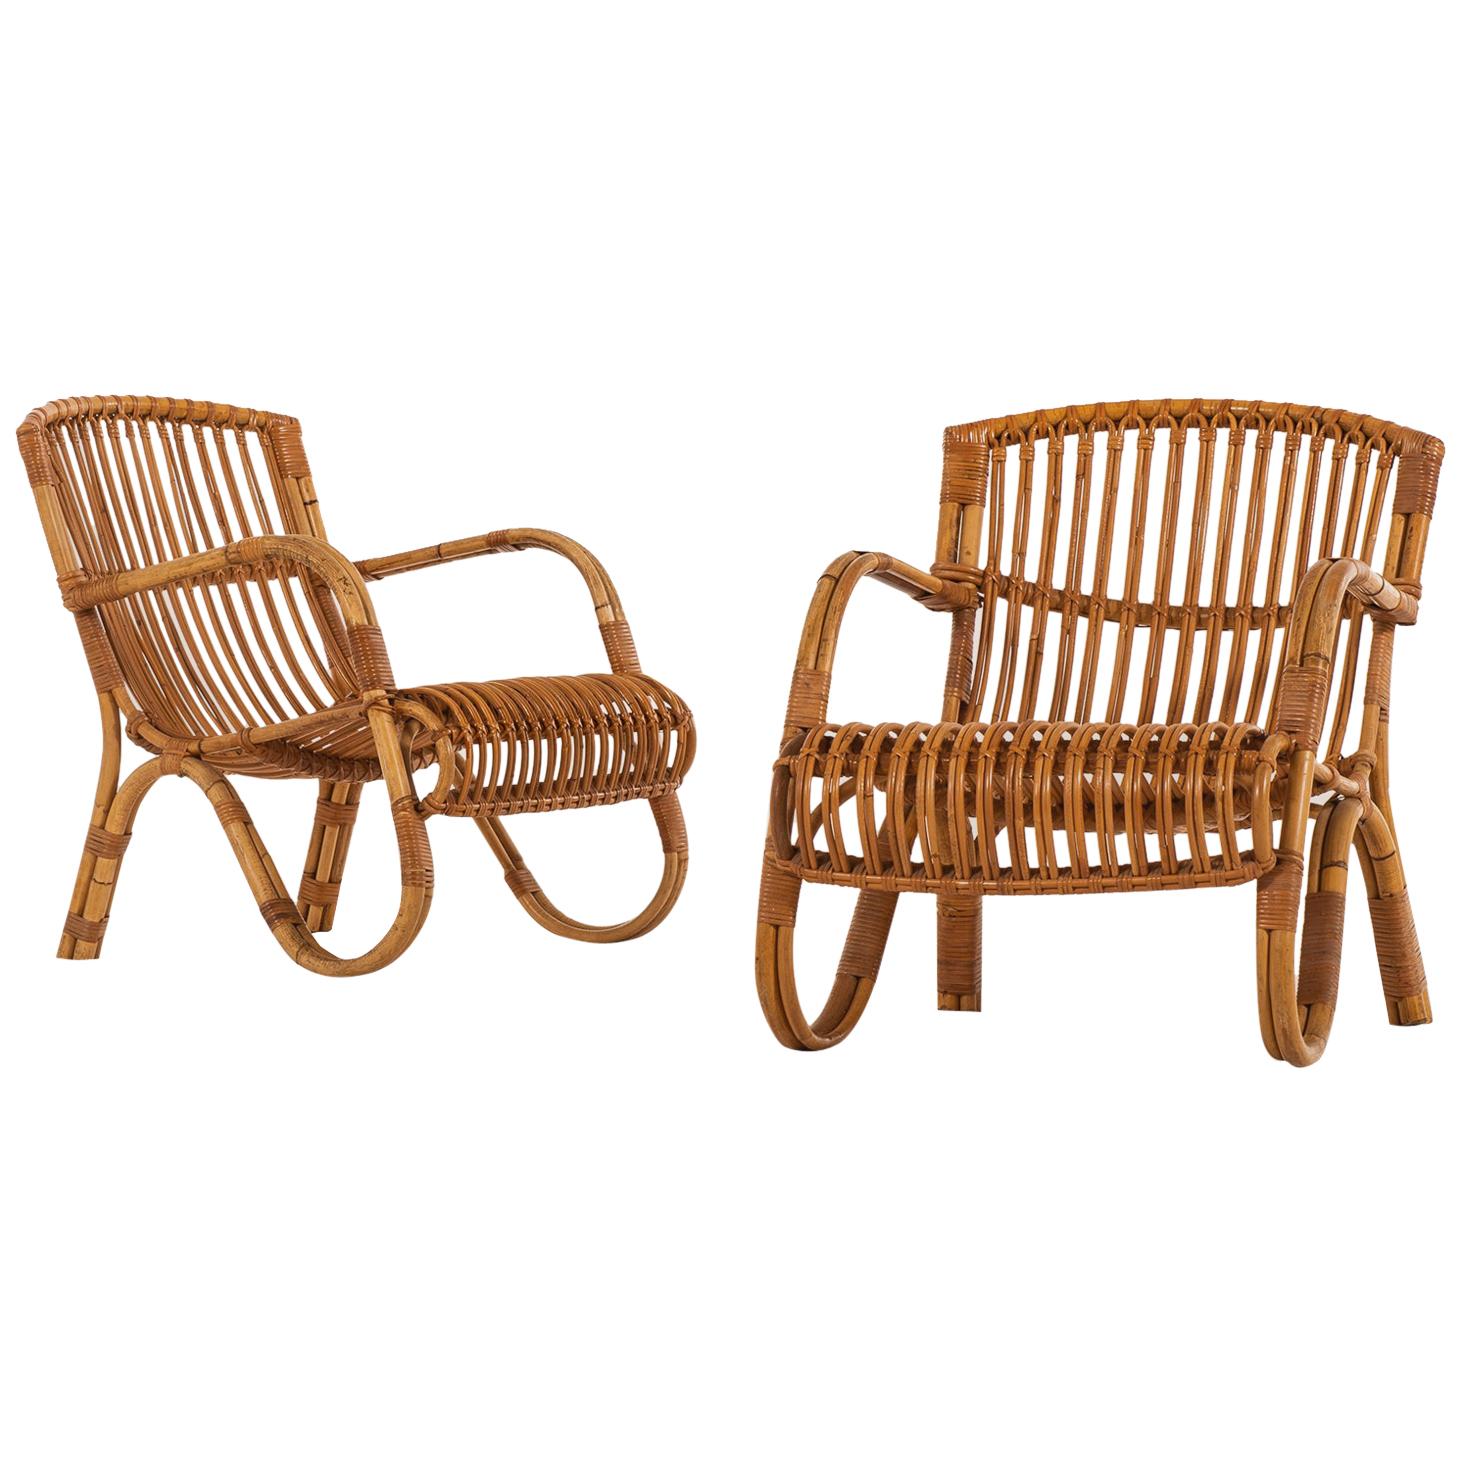 Pair of Easy Chairs in Rattan and Cane by E.V.A. Nissen & Co in Denmark